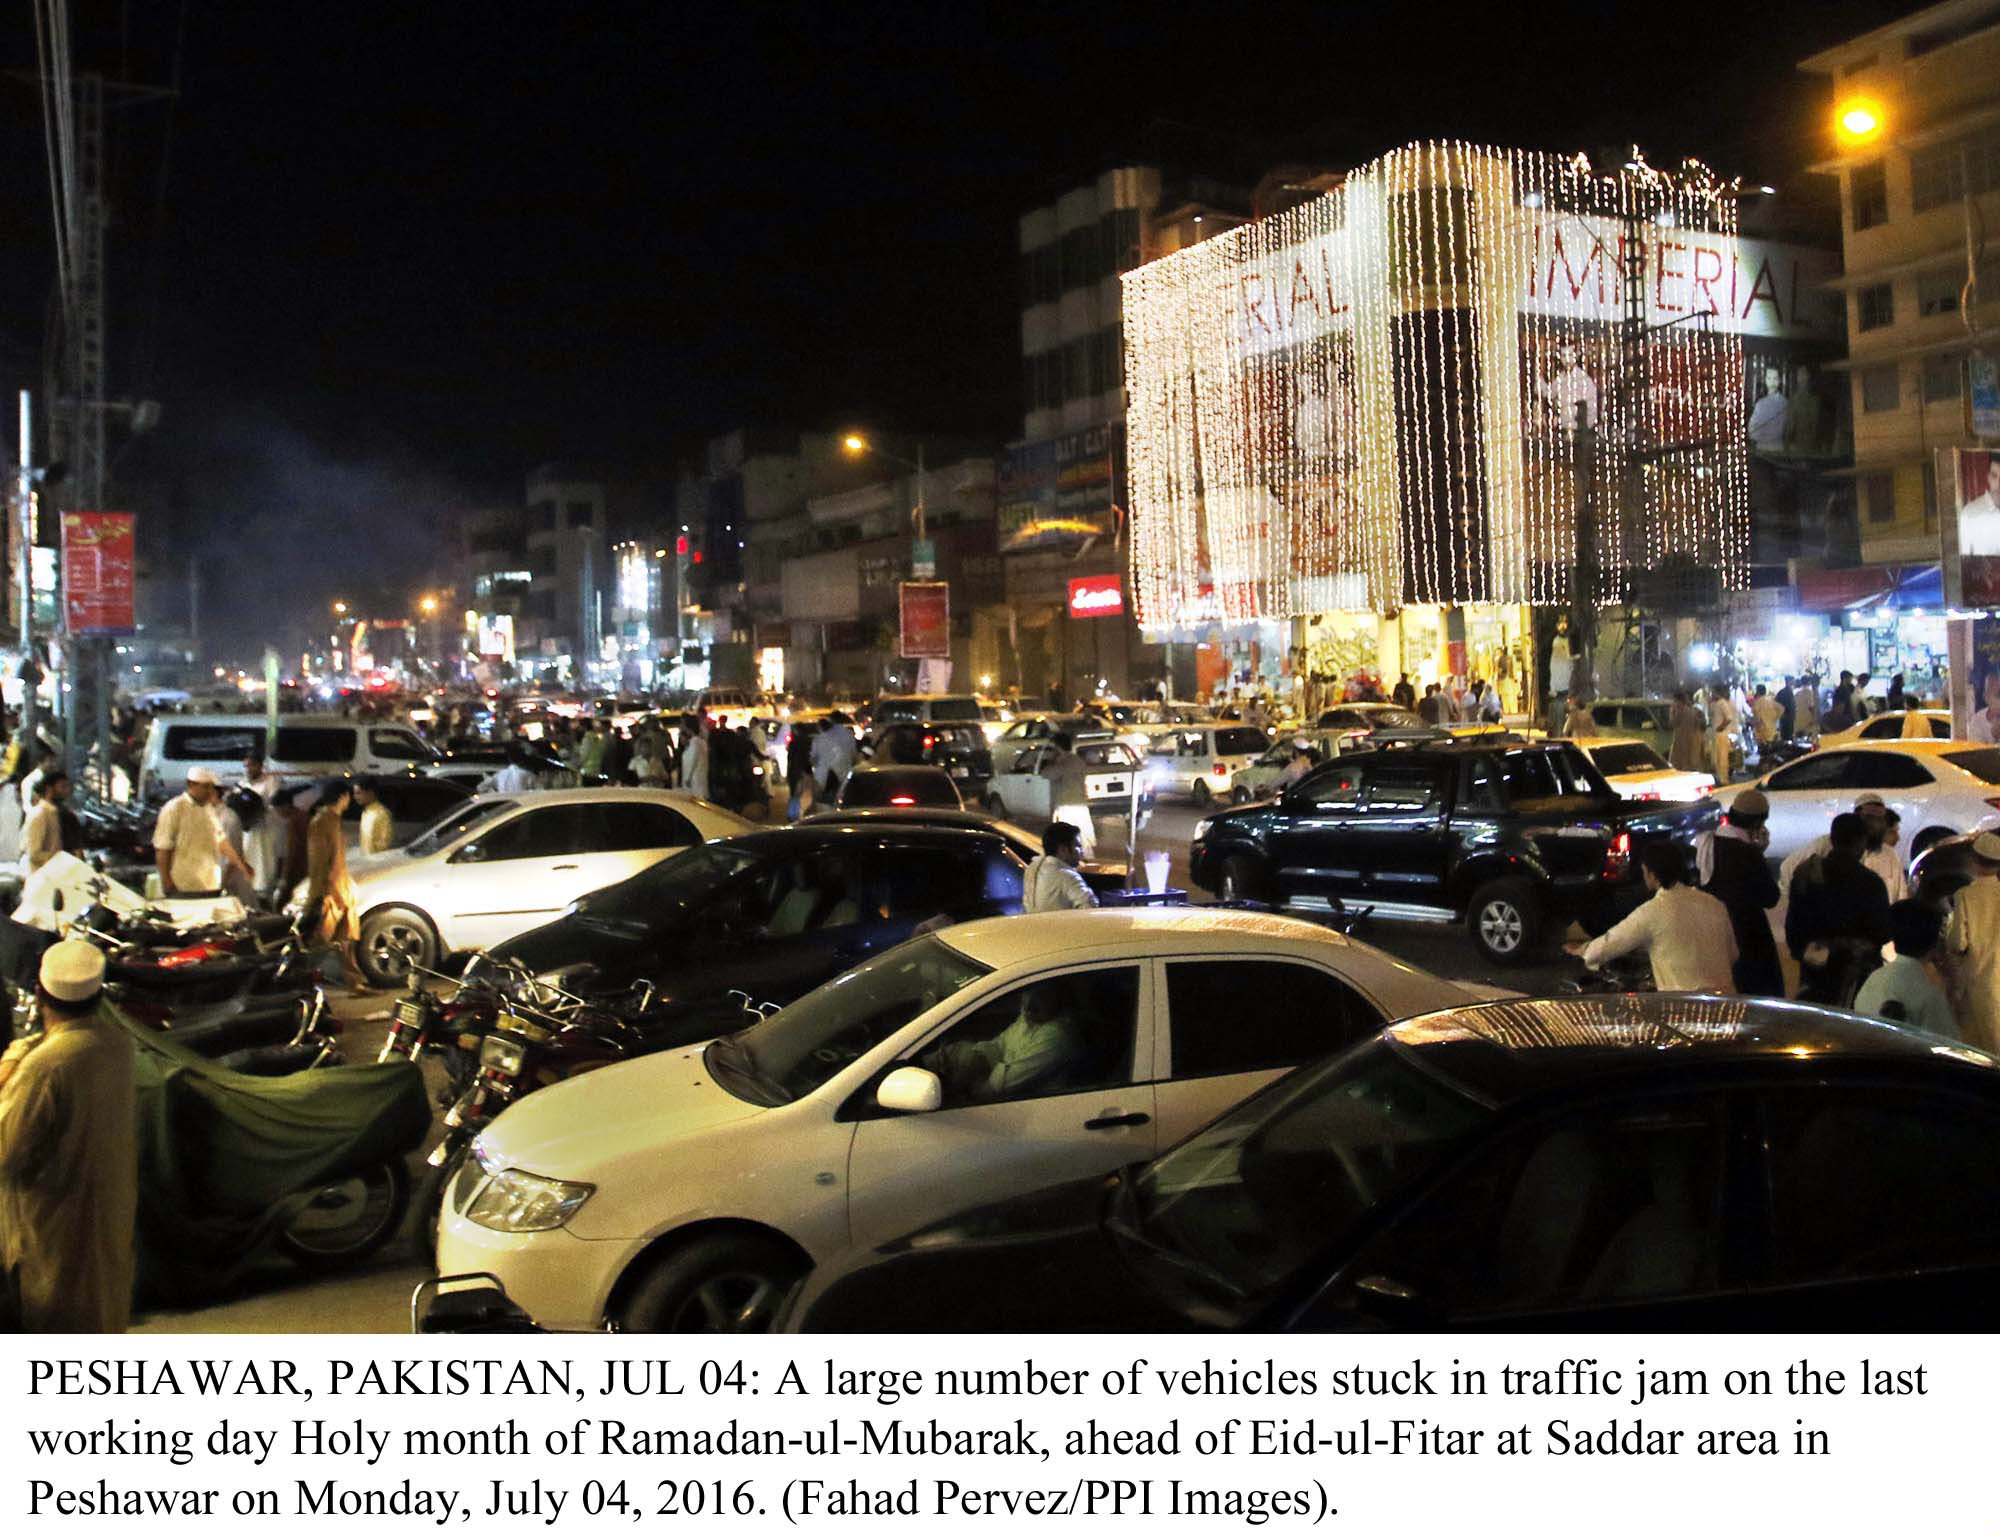 sialkot to improve traffic management